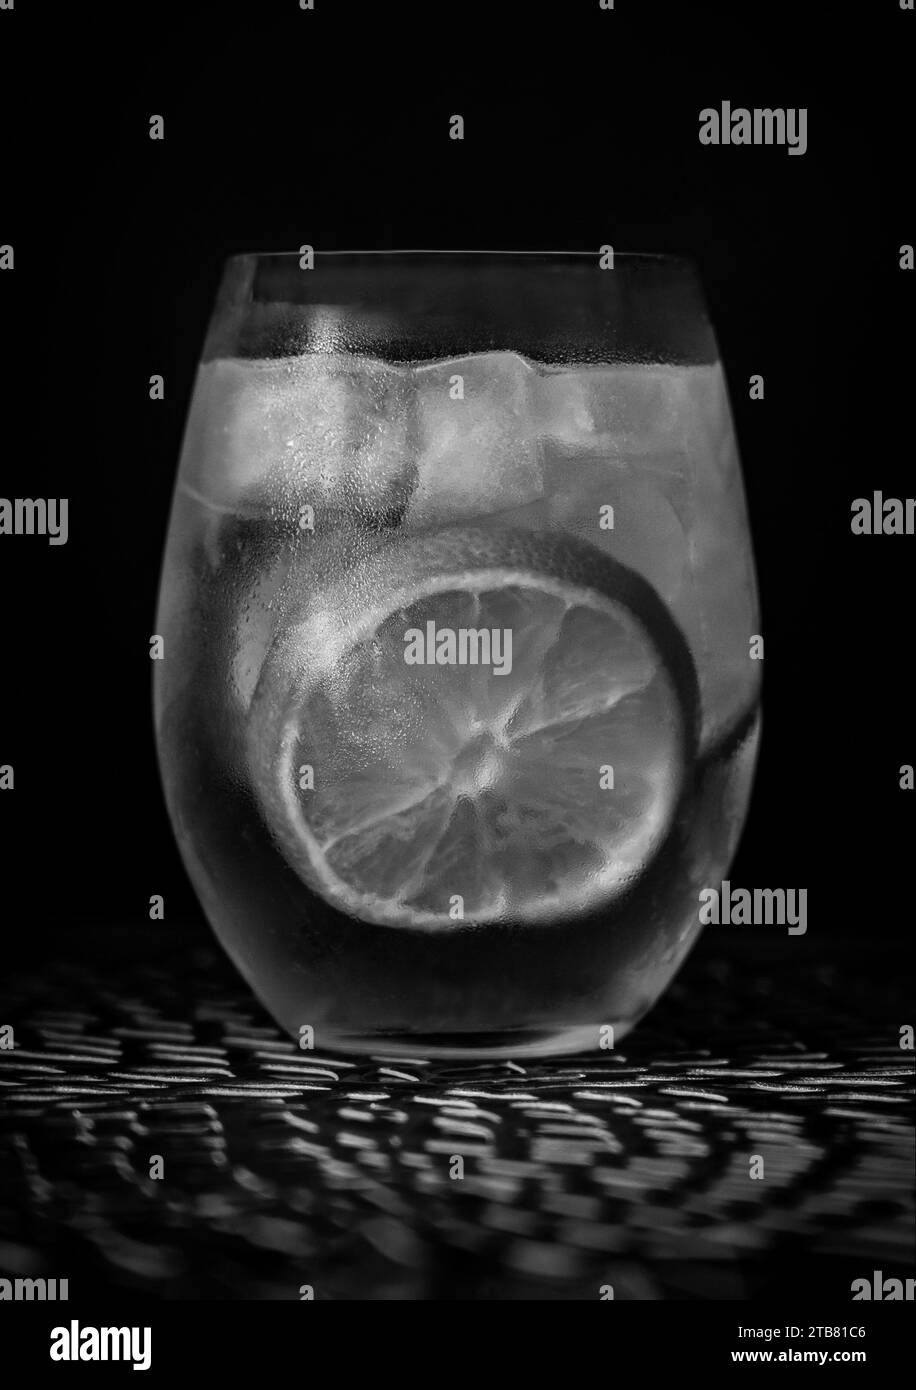 Gin and Tonic cocktail in black and white with ice and lemon Stock Photo